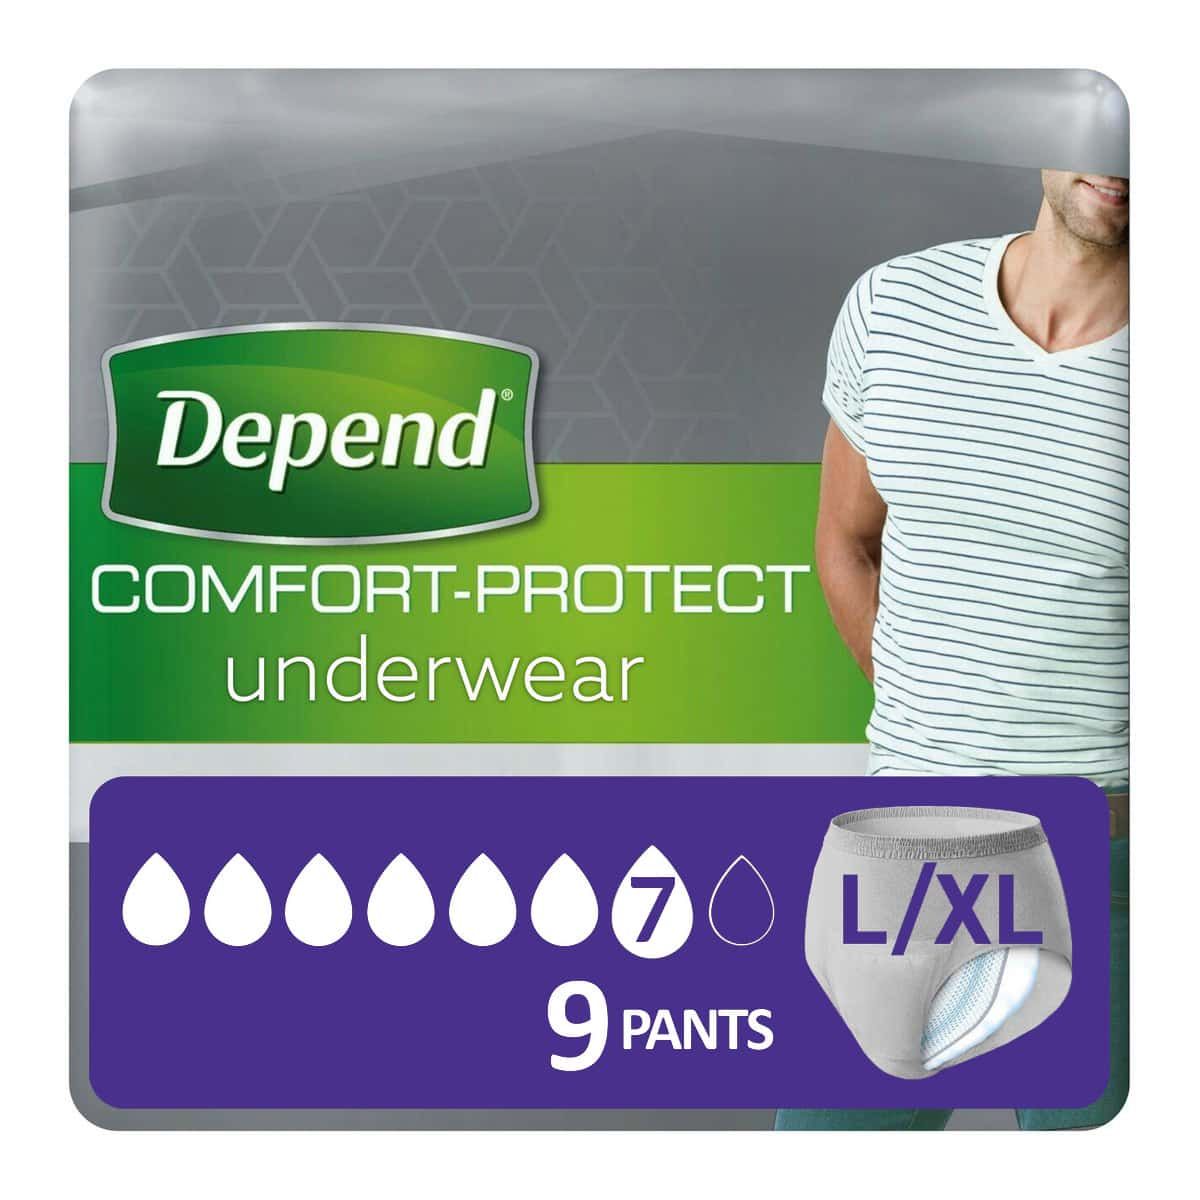 Depend Comfort-Protect Pants for Men Large/XL 1740ml 9 Pack